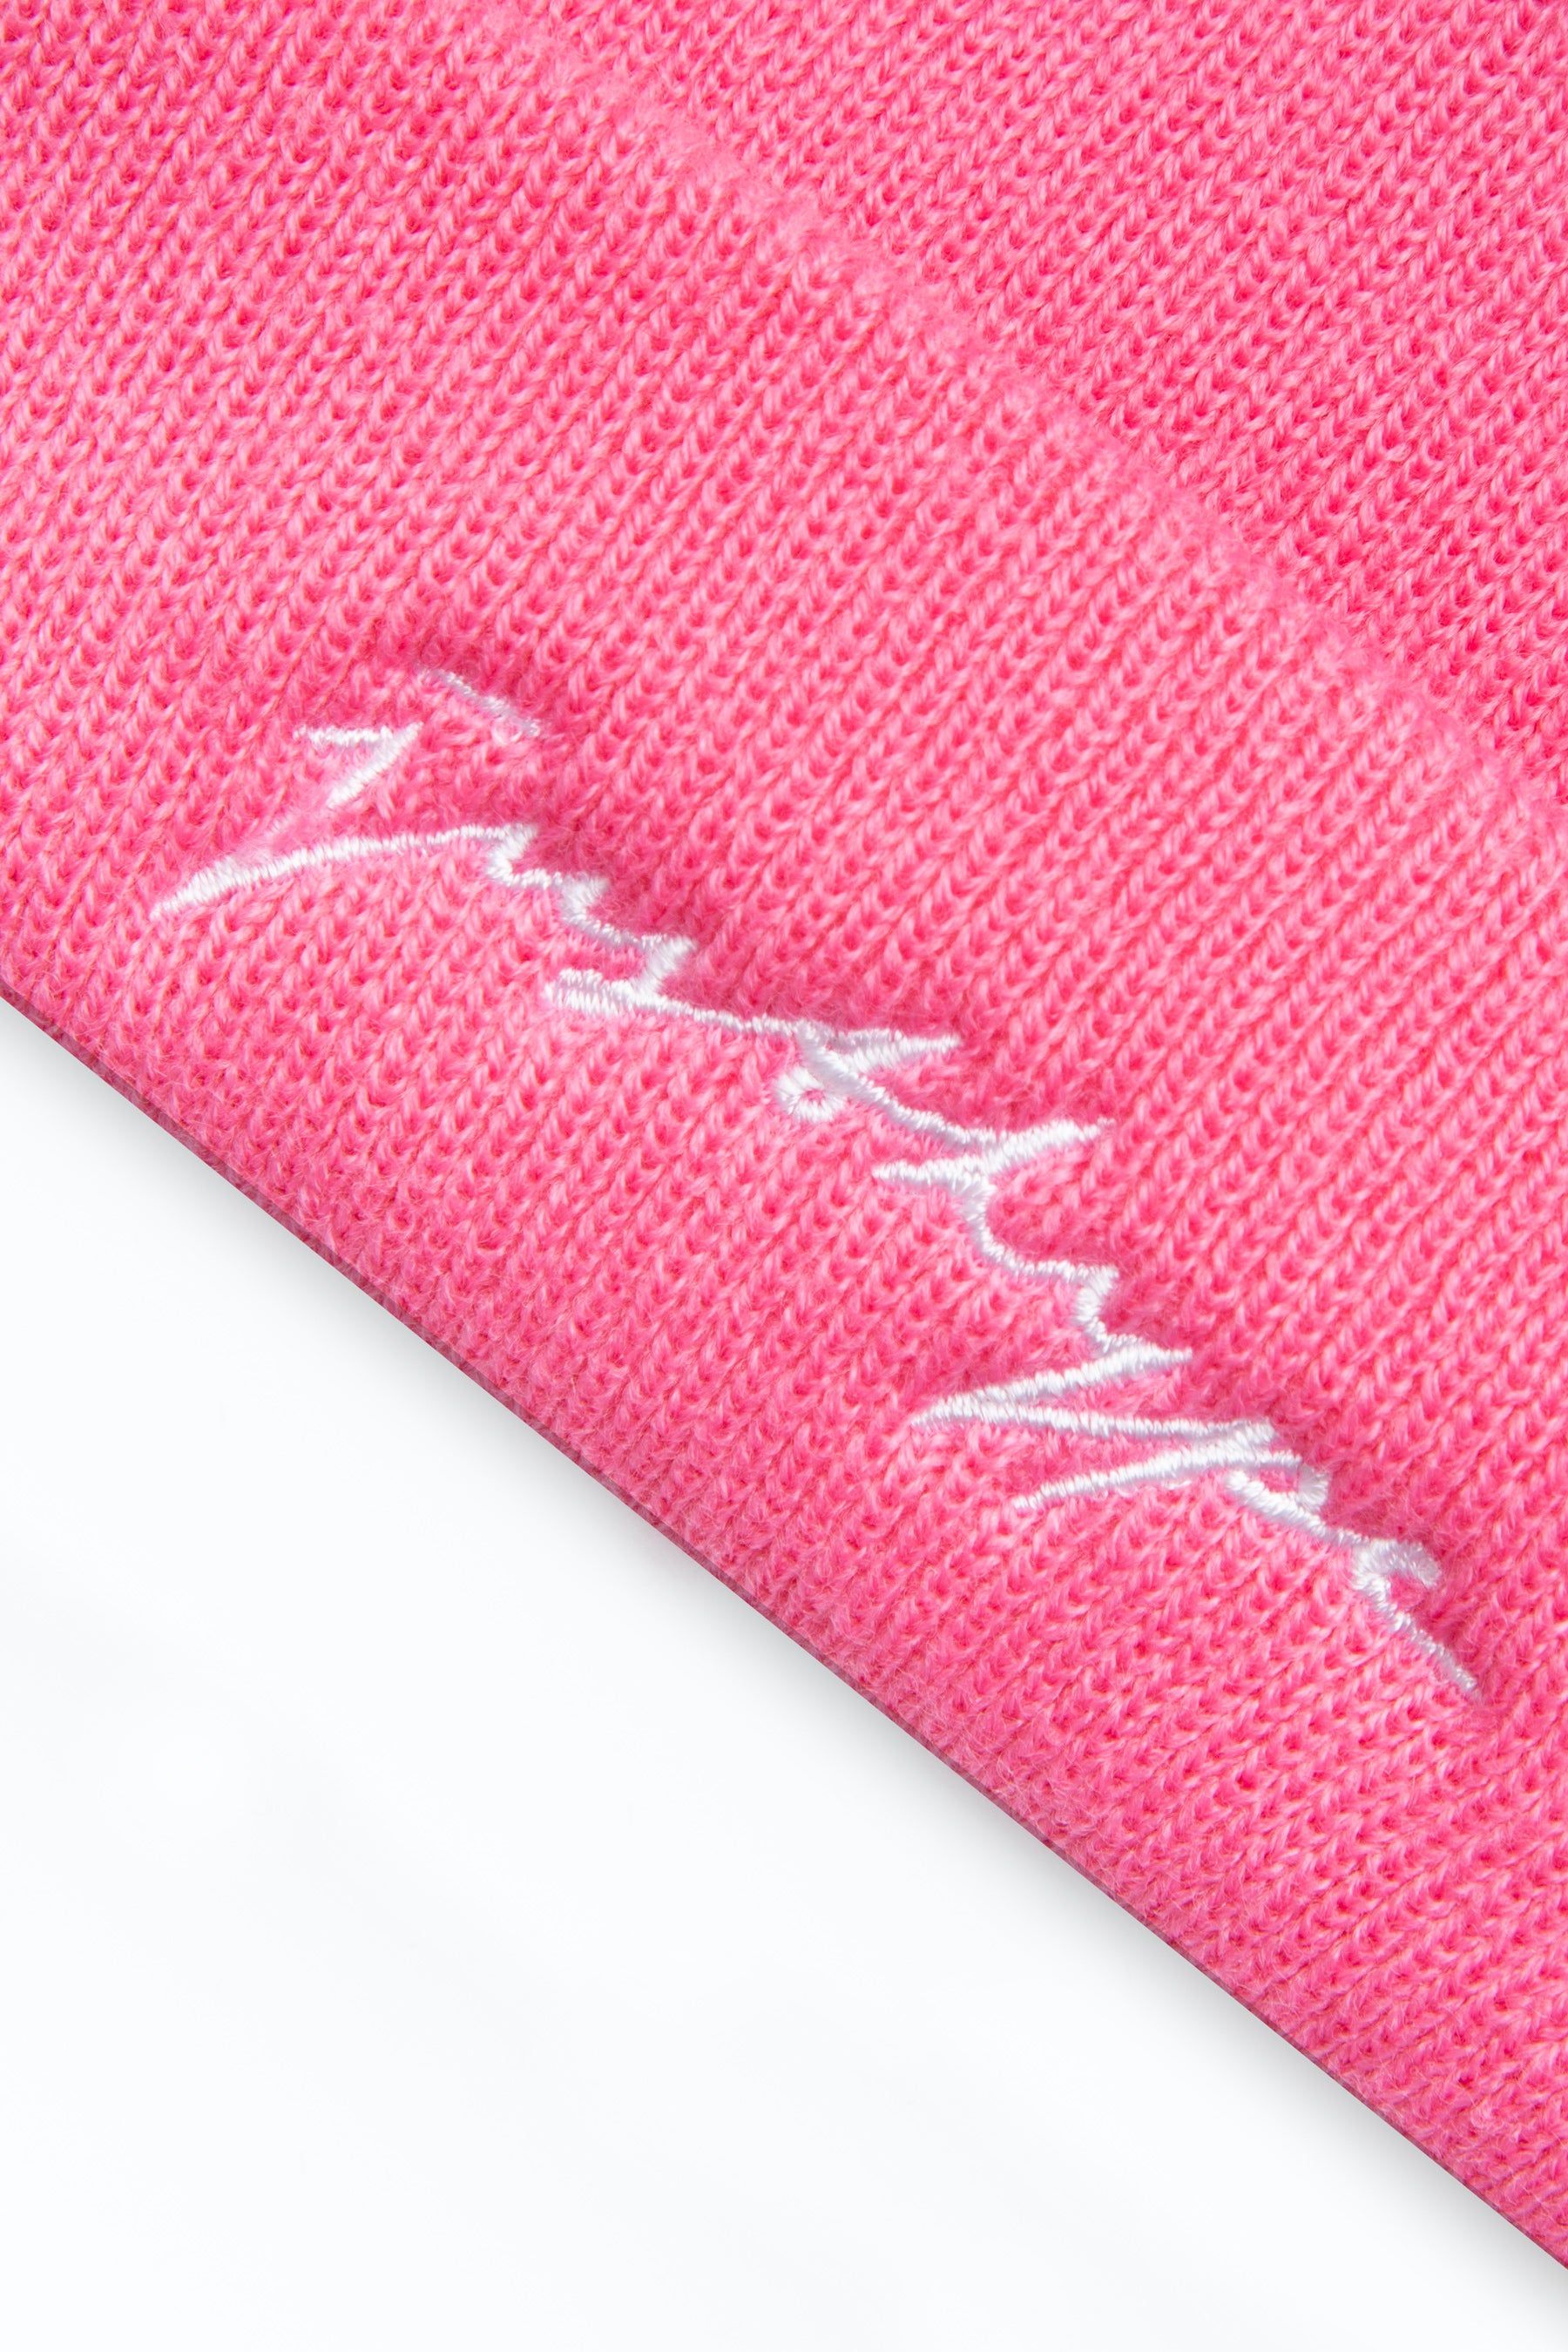 Keep your head warm with the HYPE. pink scribble beanie. In a one-size fit, this is perfect for adults. In a pink all over soft-touch fabric in double knit for the ultimate comfort. Finished with a cuff design and the new HYPE. signature logo in a contrasting white woven on the front. Machine wash inside out at 30 degrees.